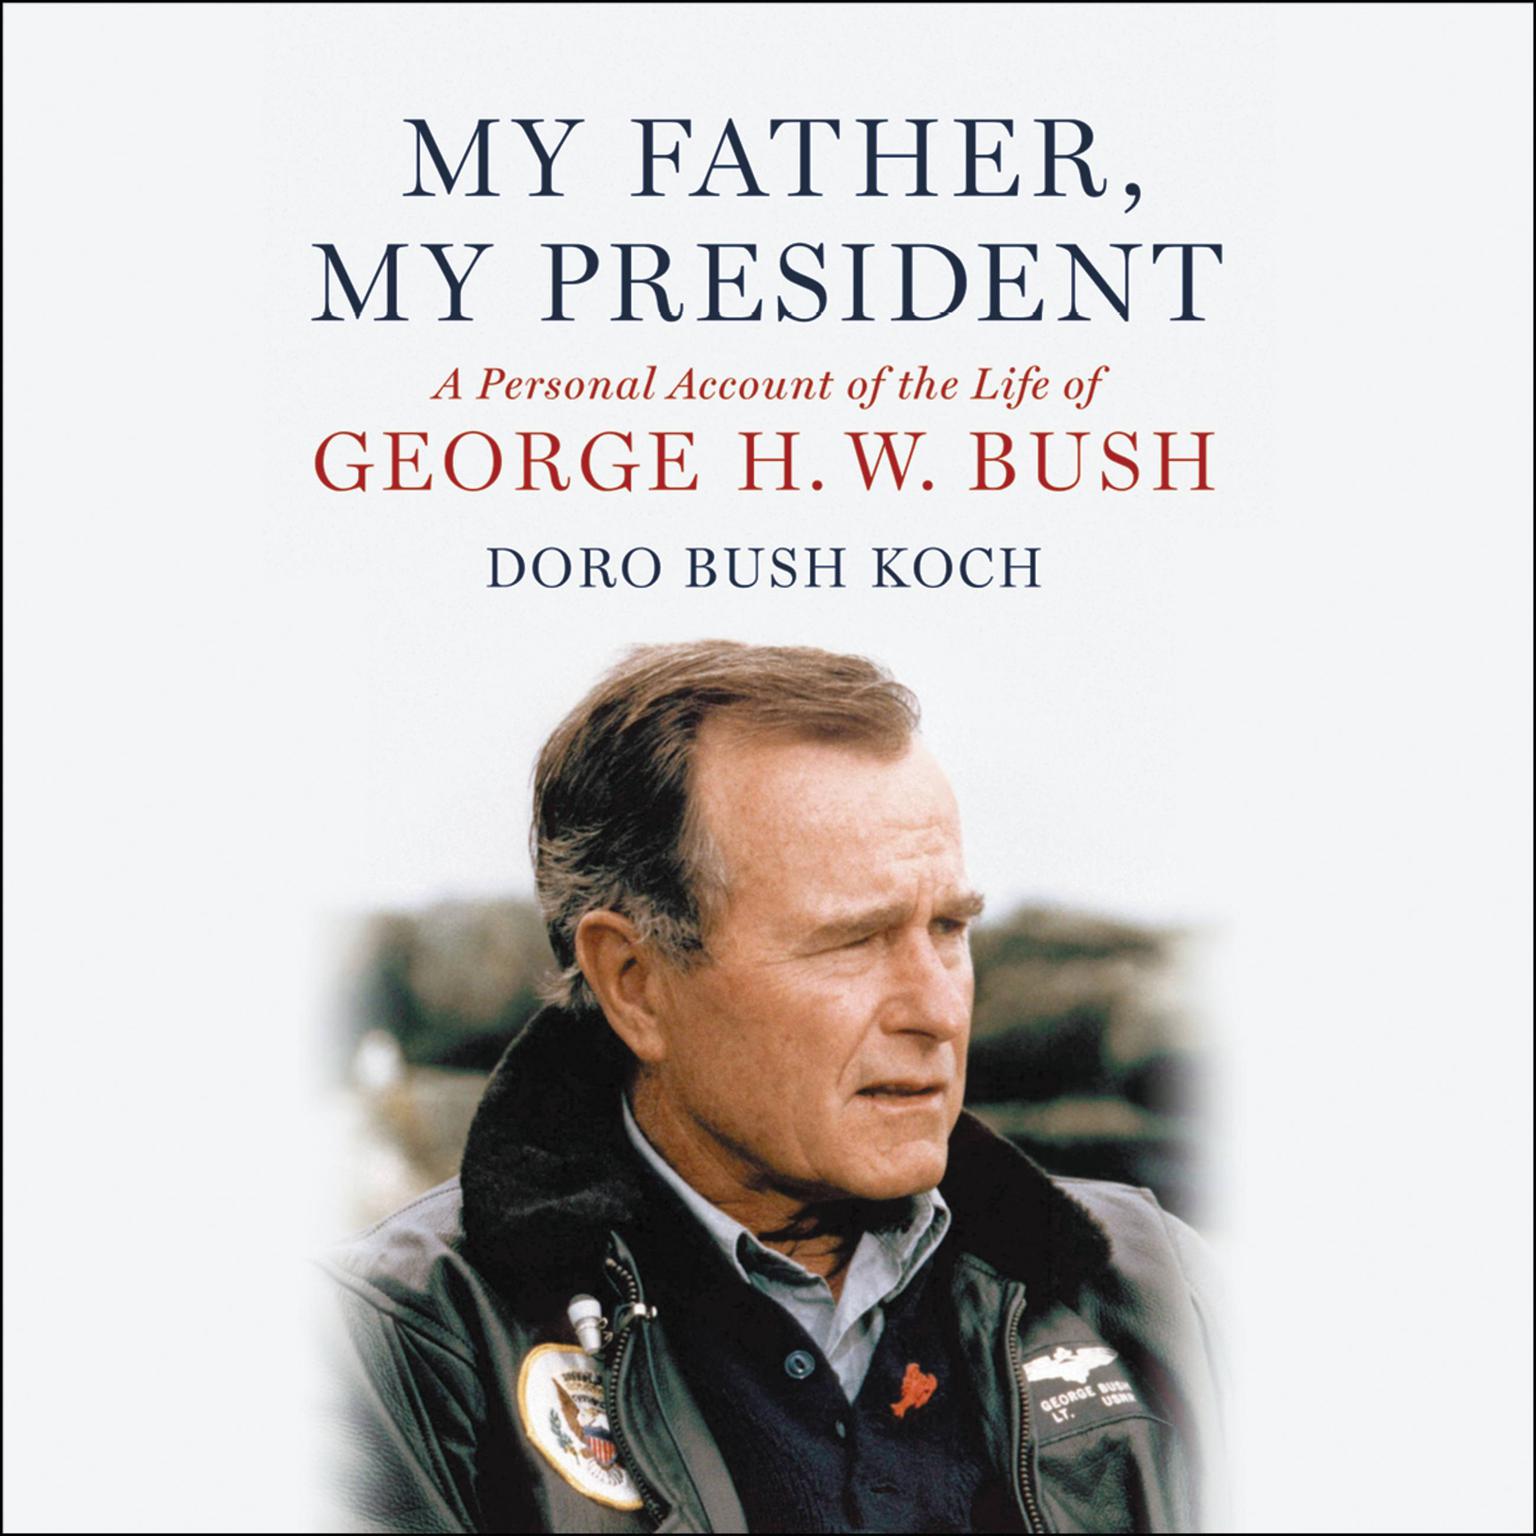 My Father, My President (Abridged): A Personal Account of the Life of George H. W. Bush Audiobook, by Doro Bush Koch